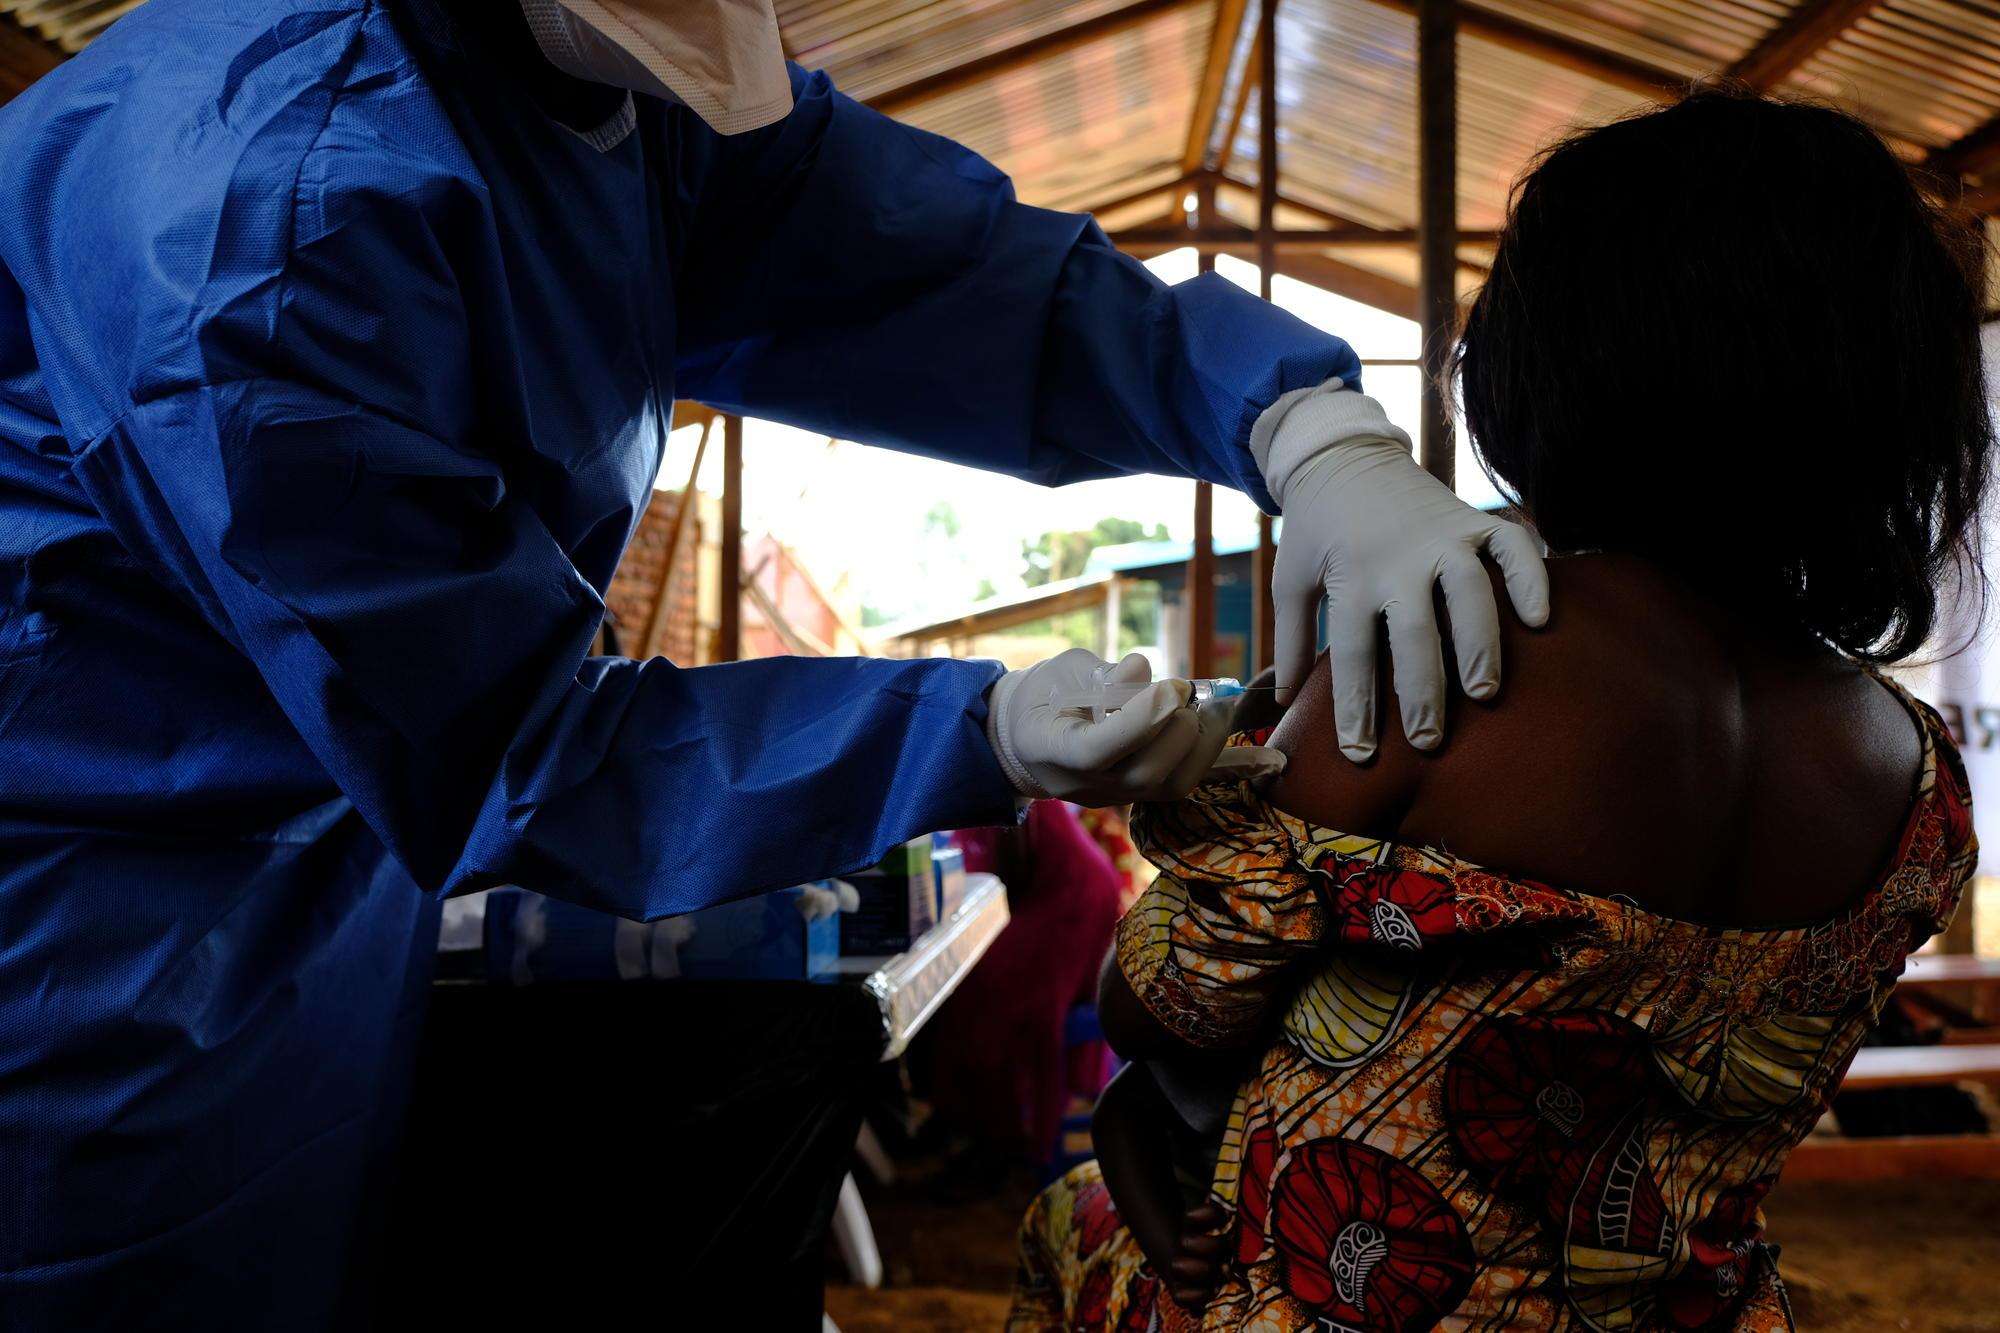 A health worker administers an Ebola vaccine at the MSF-supported health center of Kanzulinzuli, in Beni, DRC.